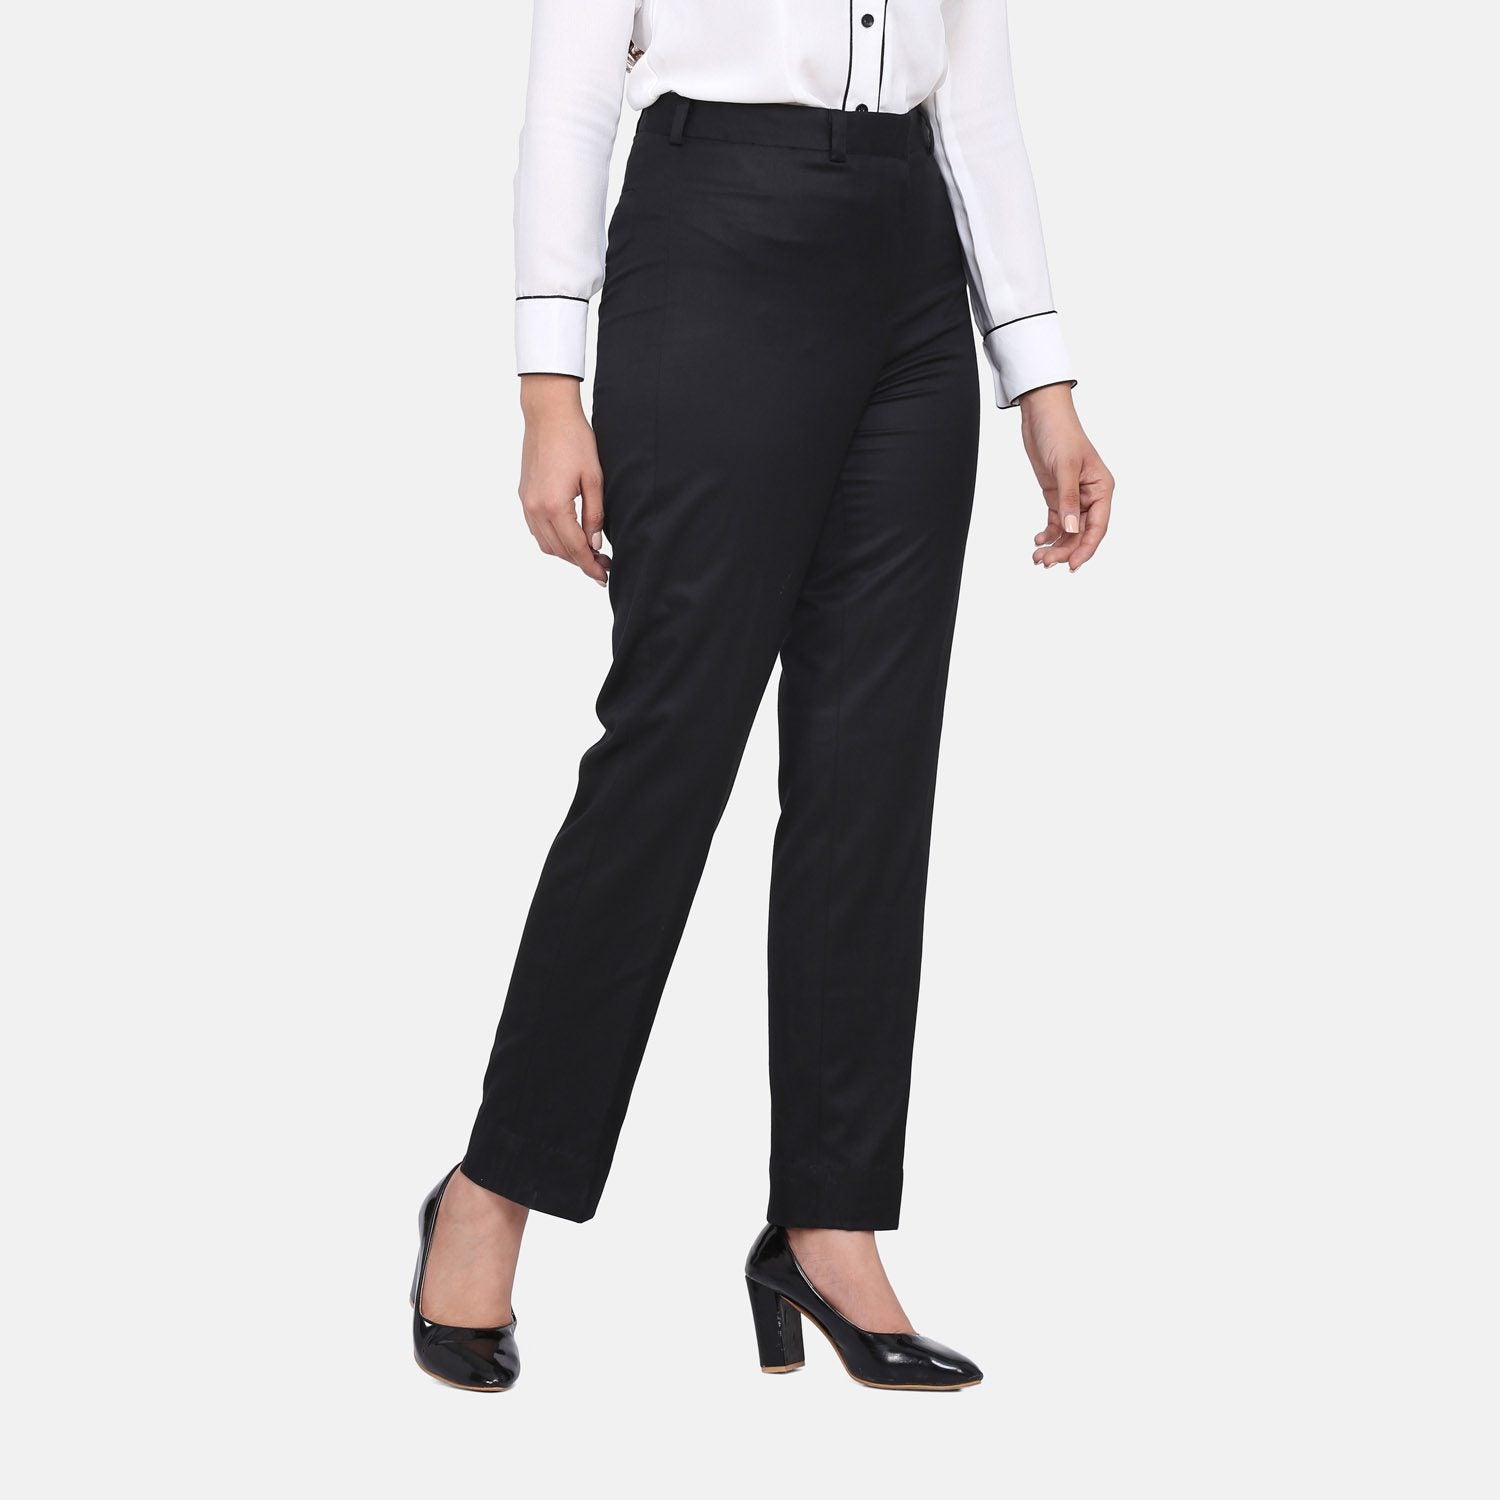 Kick It Grey High-Waisted Trouser Pants | Stylish work outfits,  Professional outfits, Fashion outfits